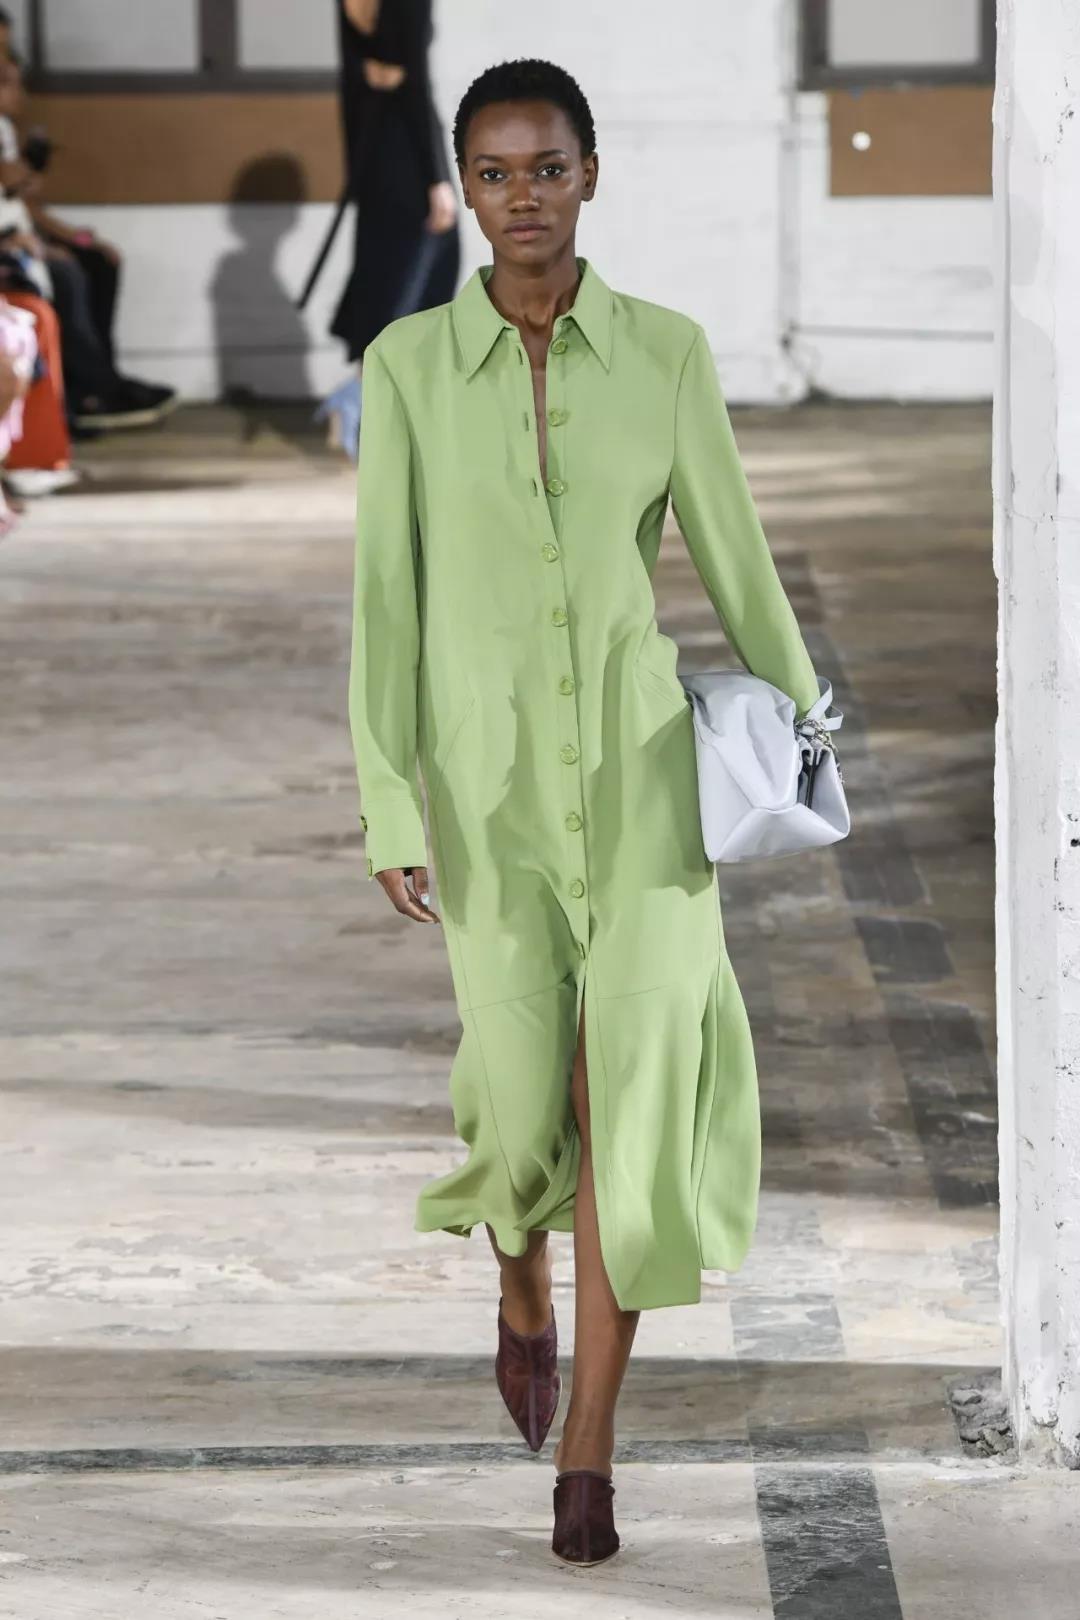 Chic Avocado Green Ideas for Summer 2019 - Fancy Ideas about Everything